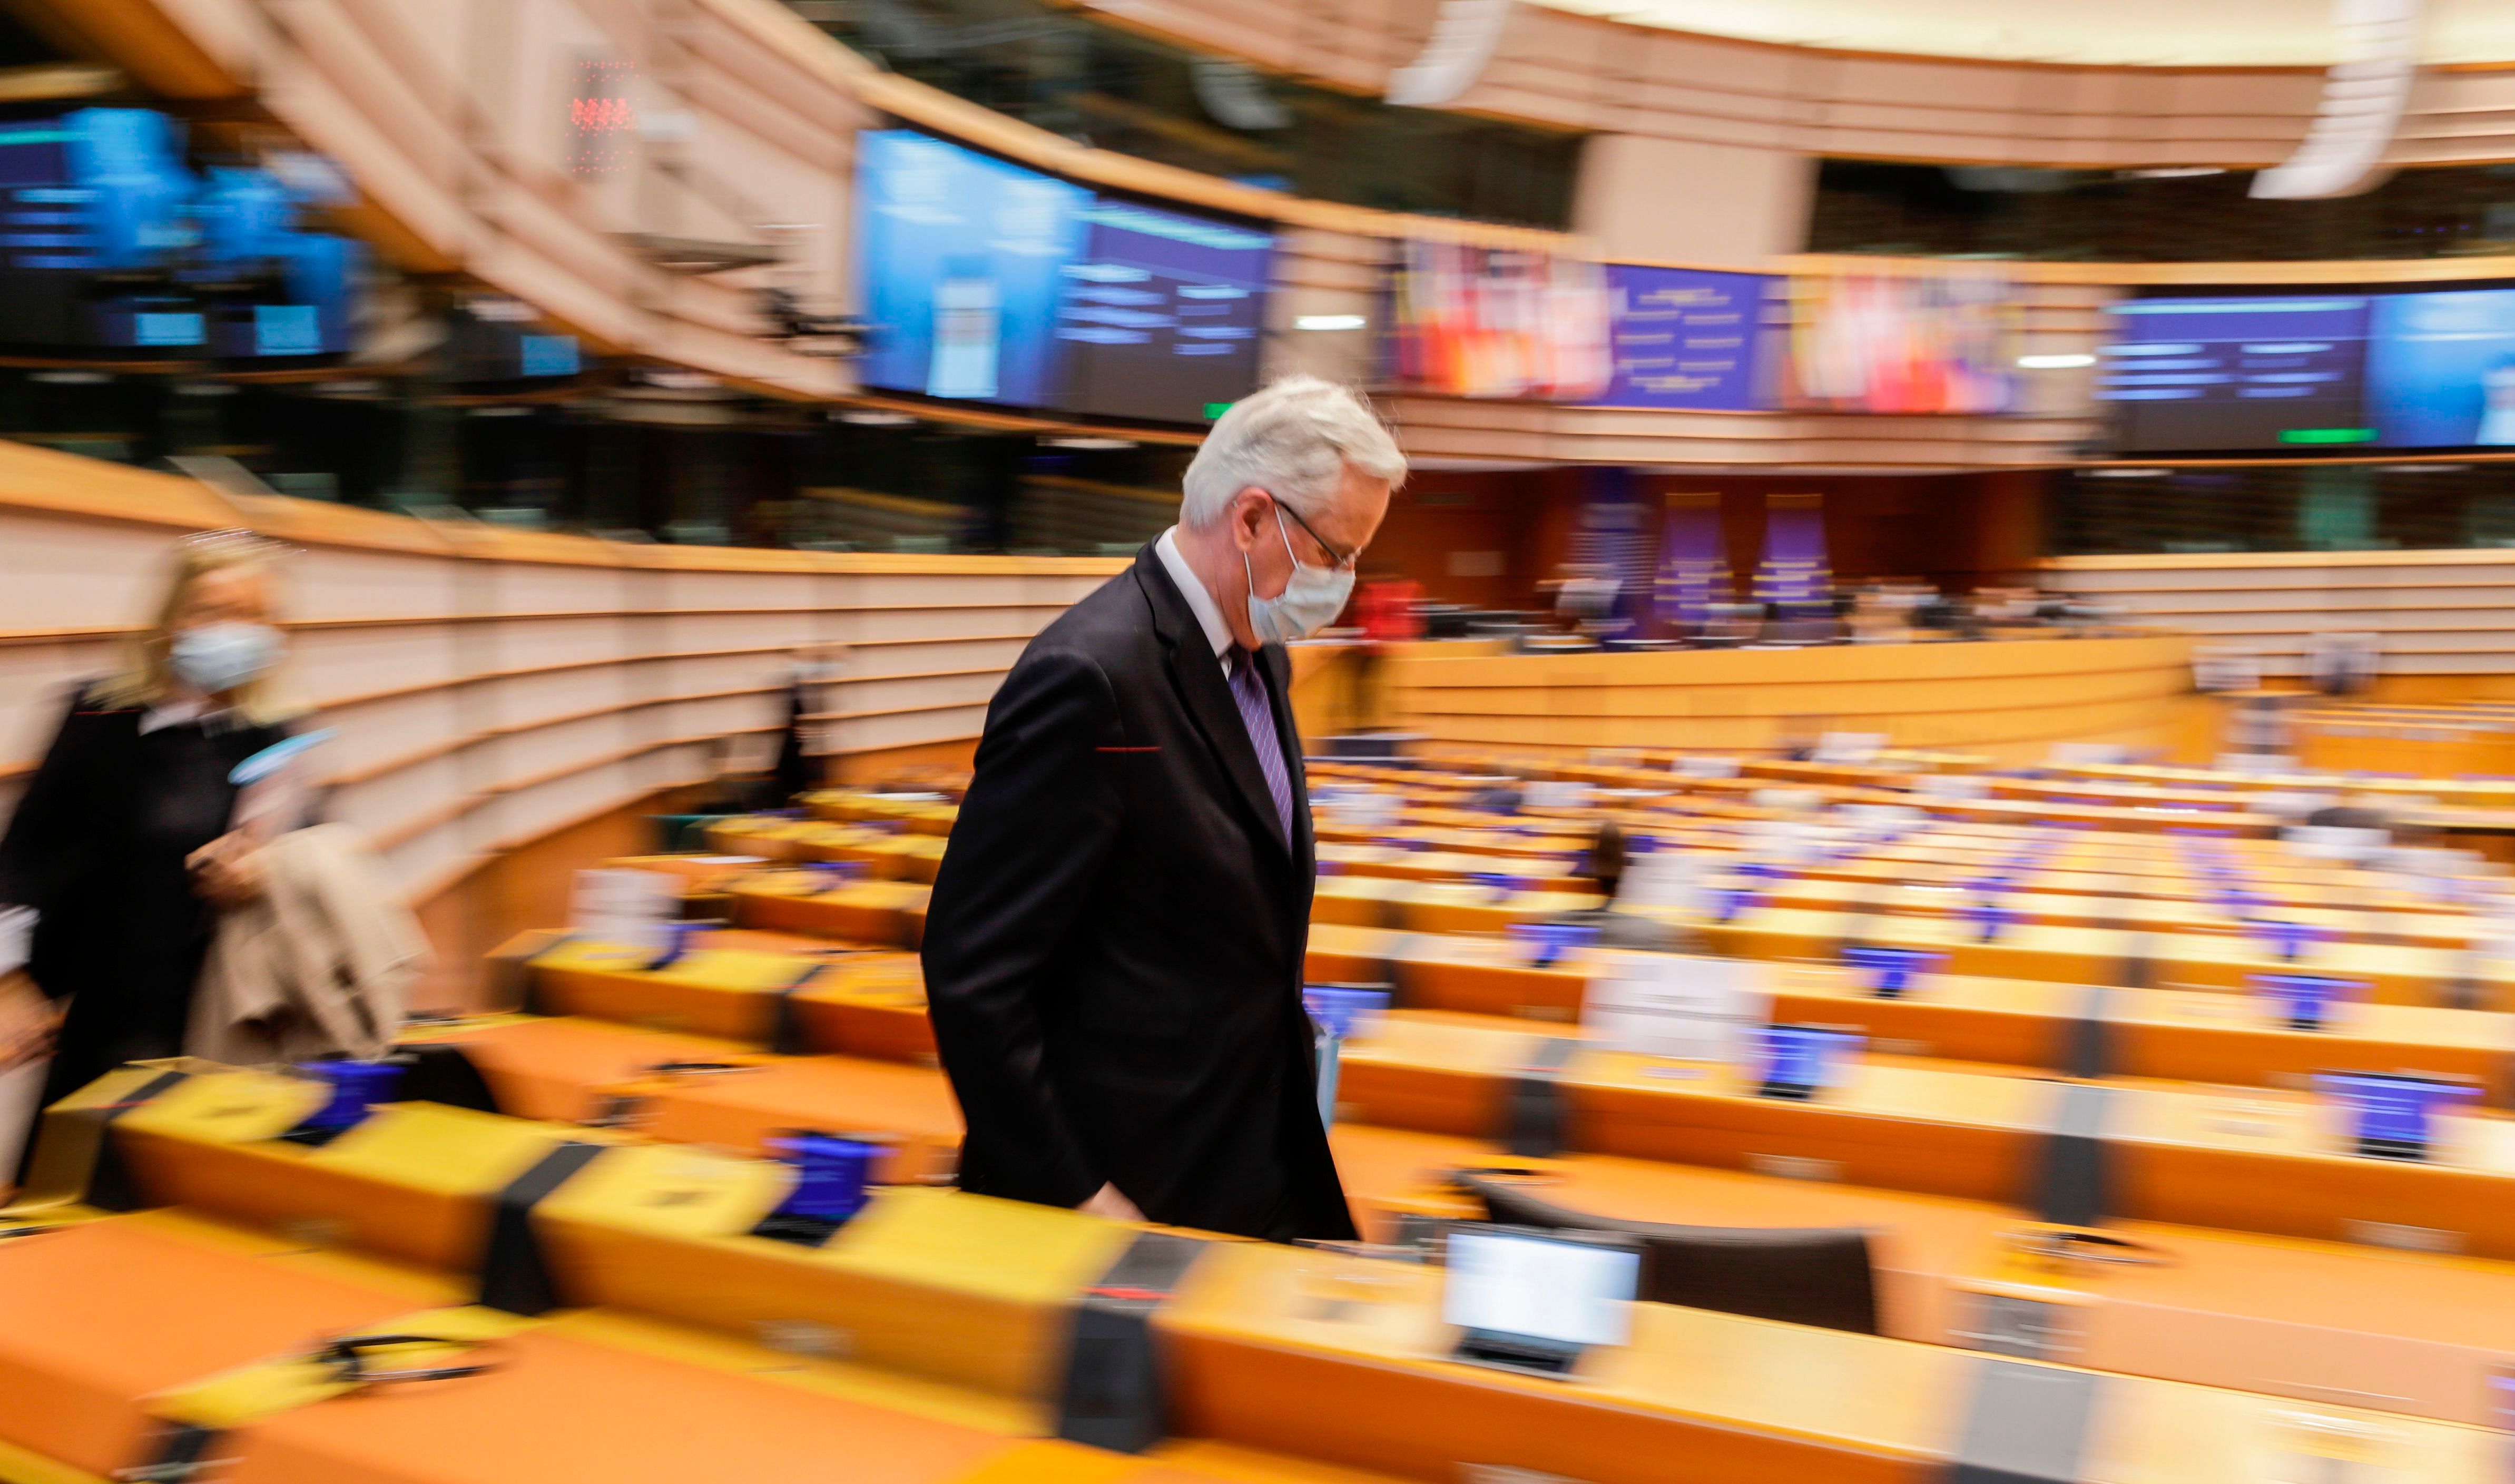 EU chief negotiator Michel Barnier leaves the hemicycle during a debate on the future of the relation between the EU and UK. Credit: AFP Photo